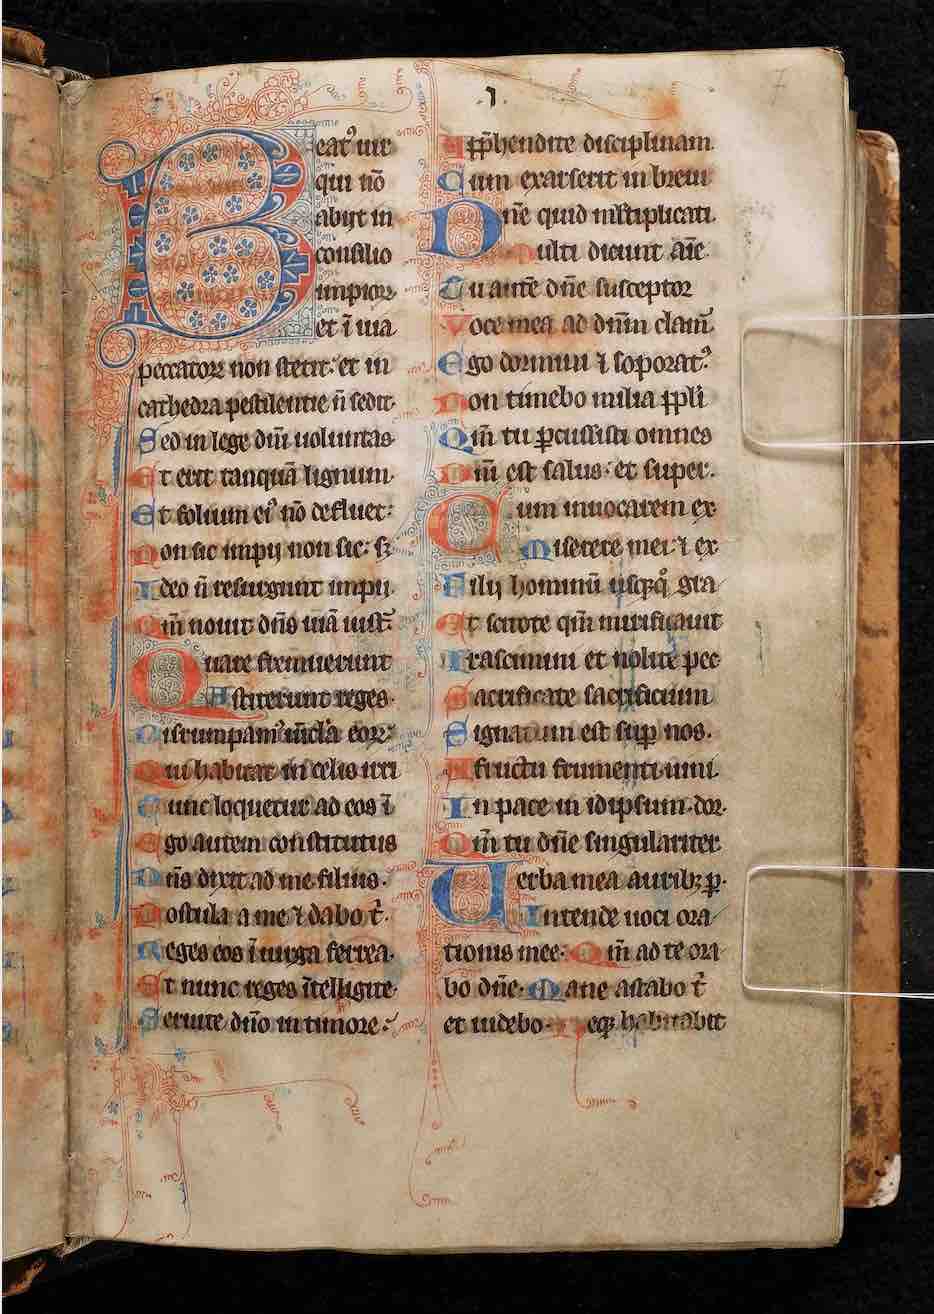 Bethune Breviary-Missal from 13th/14th-c. France (<a href='https://w3id.org/vhmml/readingRoom/view/511651'>Bethune Ms. 2</a>)